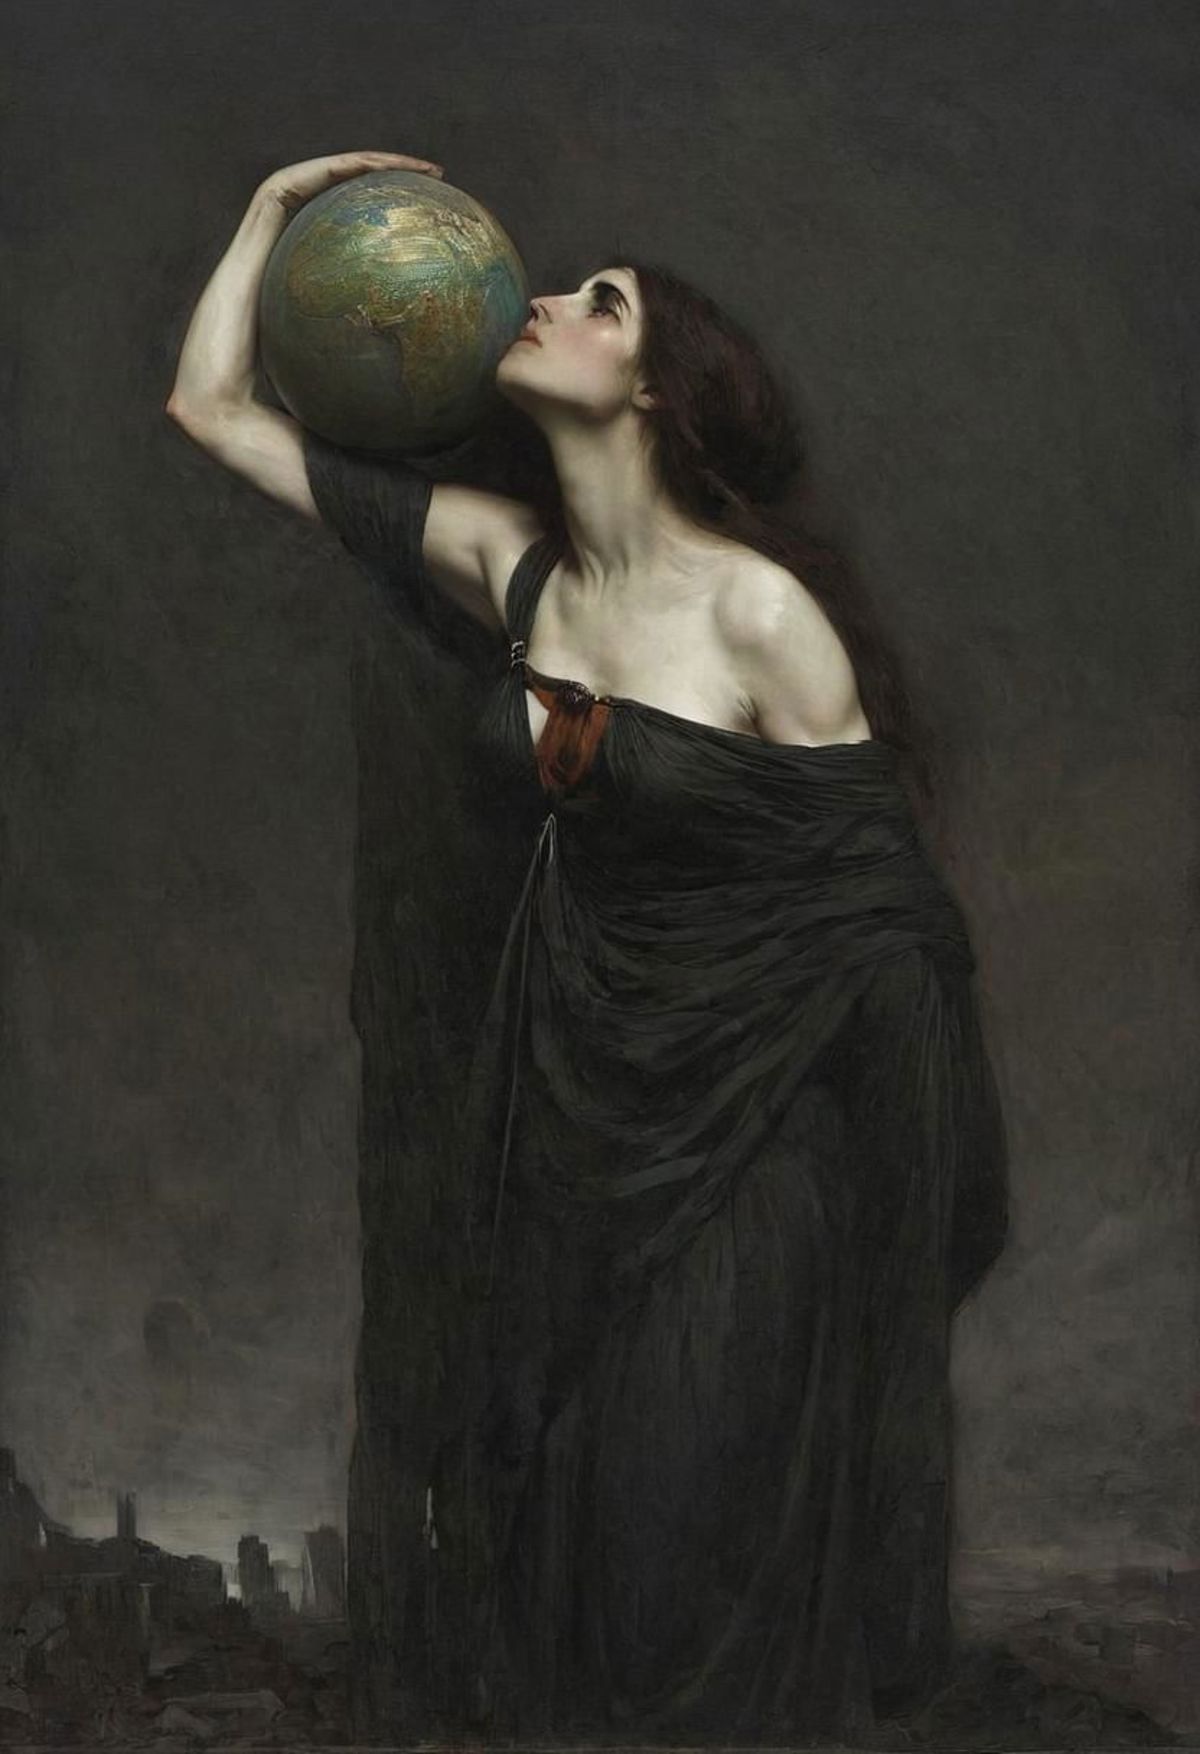 Woman holding a globe in a black dress with a red ribbon around her neck.